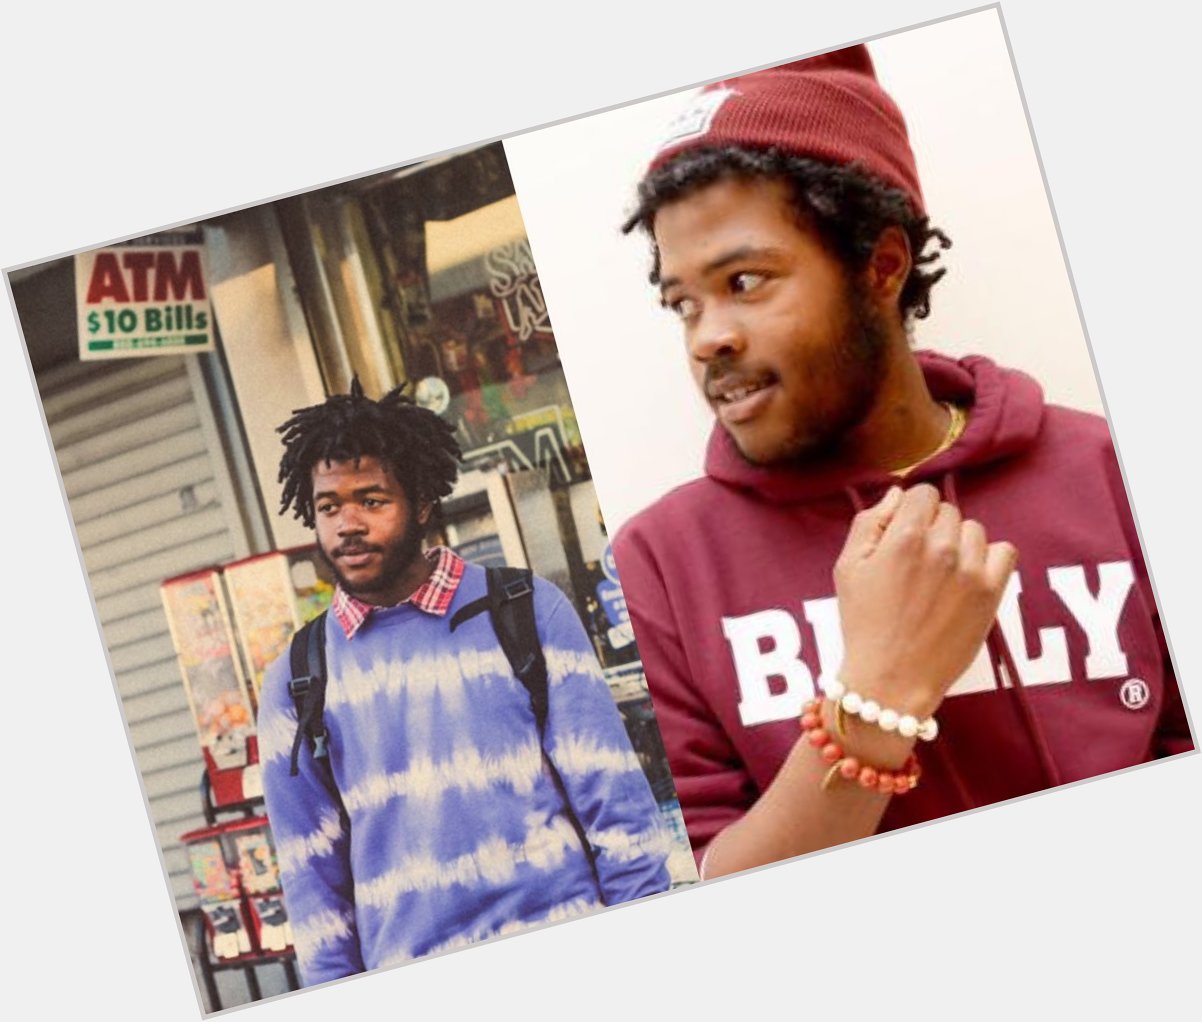 Happy Birthday to Capital Steez he would have turnt 28 years old  